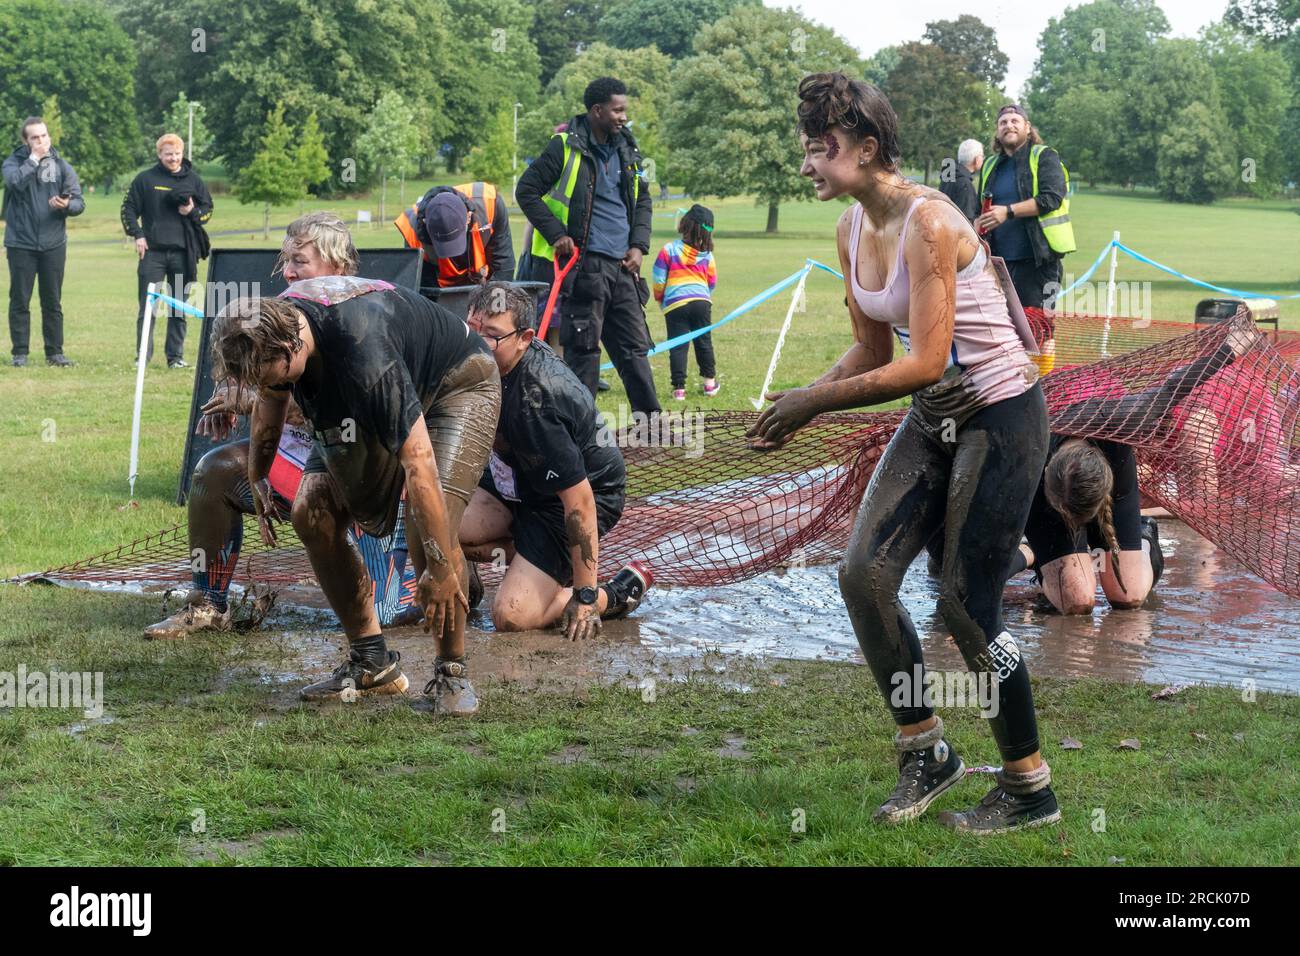 July 15th, 2023. The Reading Pretty Muddy Race for Life event took place in Prospect Park, Reading, Berkshire, England, over the weekend, with obstacle races for kids and adults. The charity event raises money for Cancer Research UK. Stock Photo